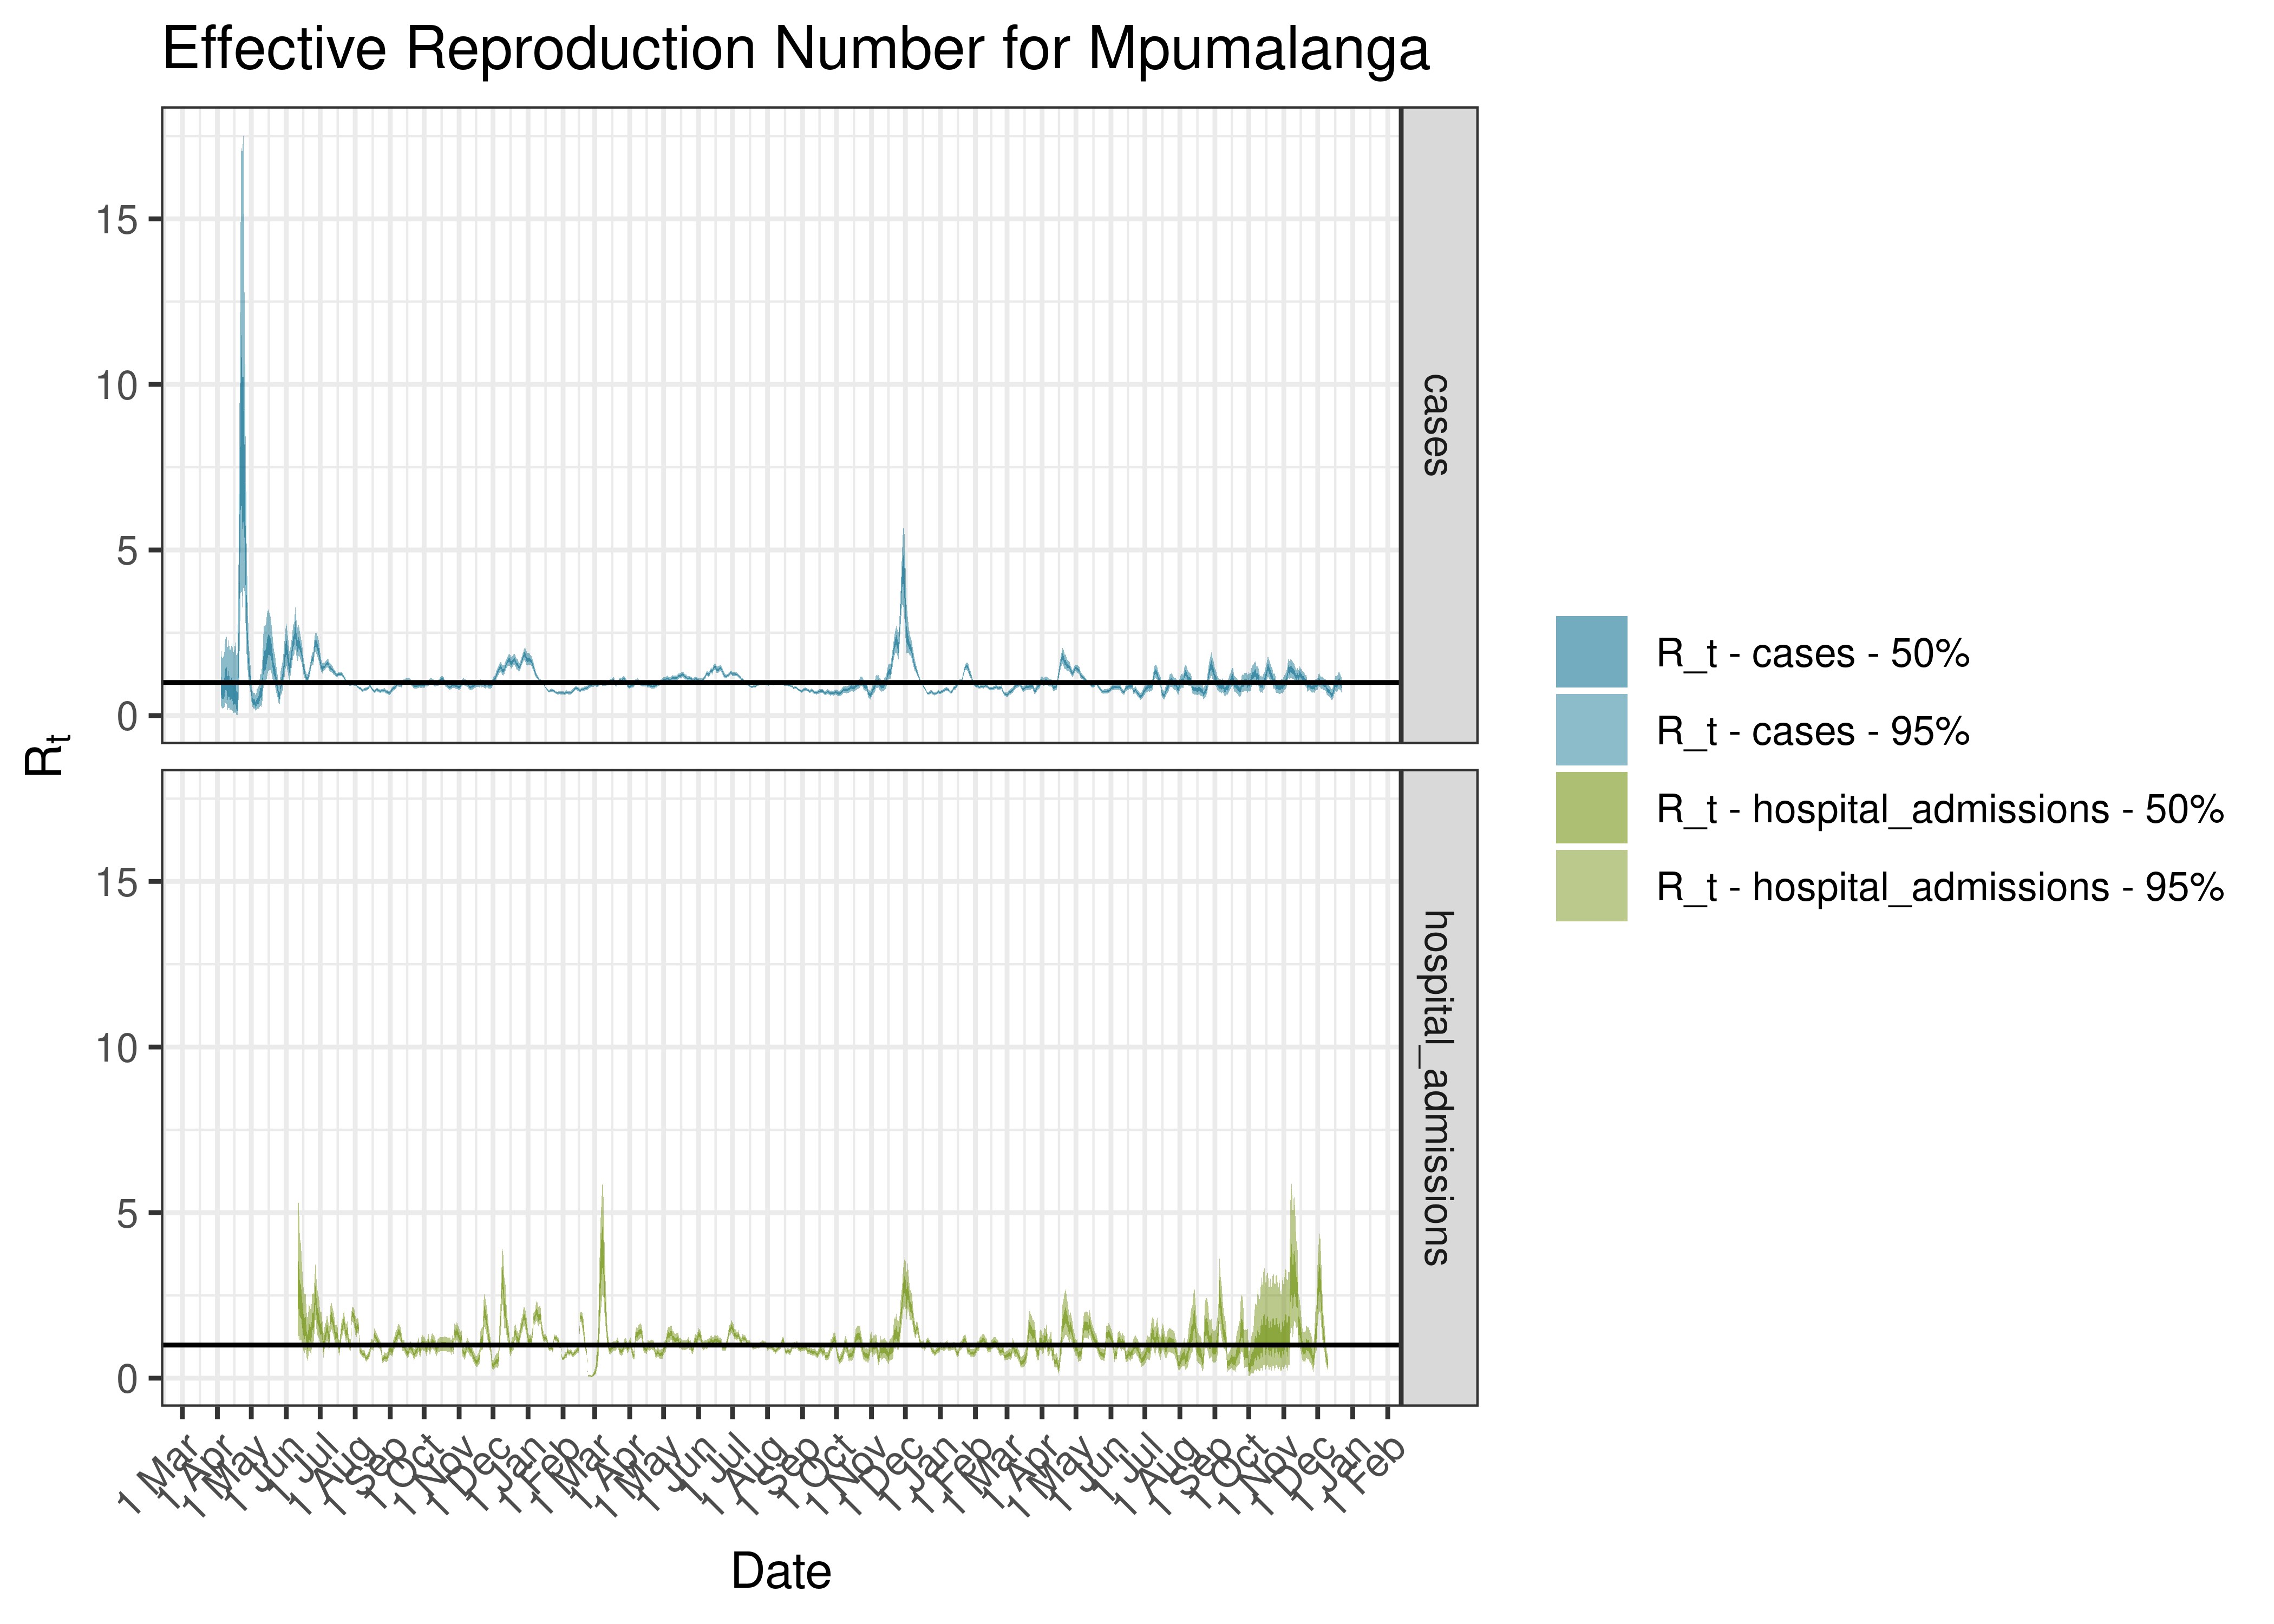 Estimated Effective Reproduction Number for Mpumalanga since 1 April 2020